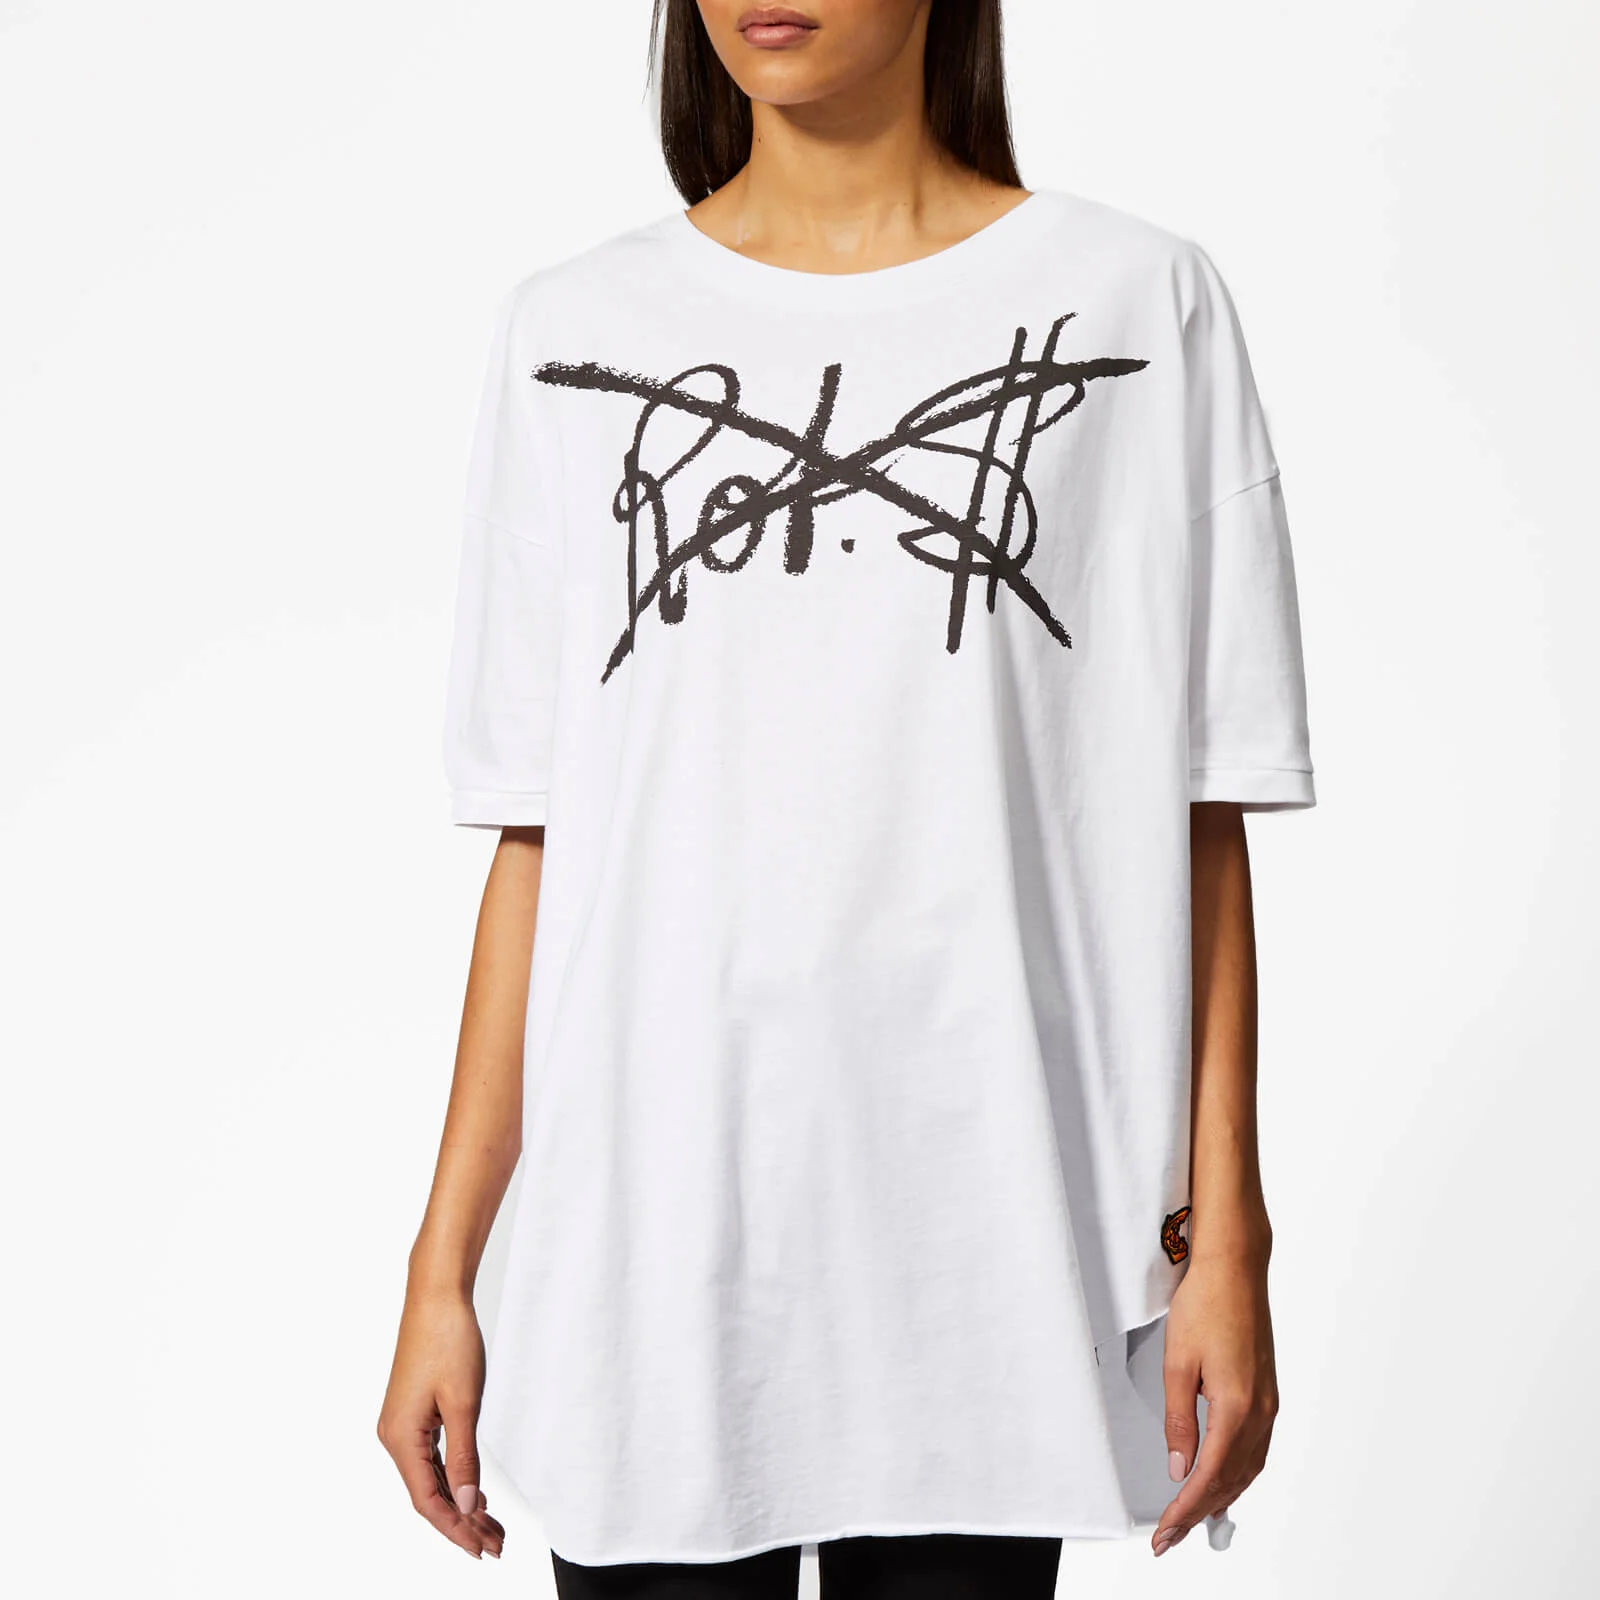 Vivienne Westwood Anglomania Women's Baggy T-Shirt - White Image 1